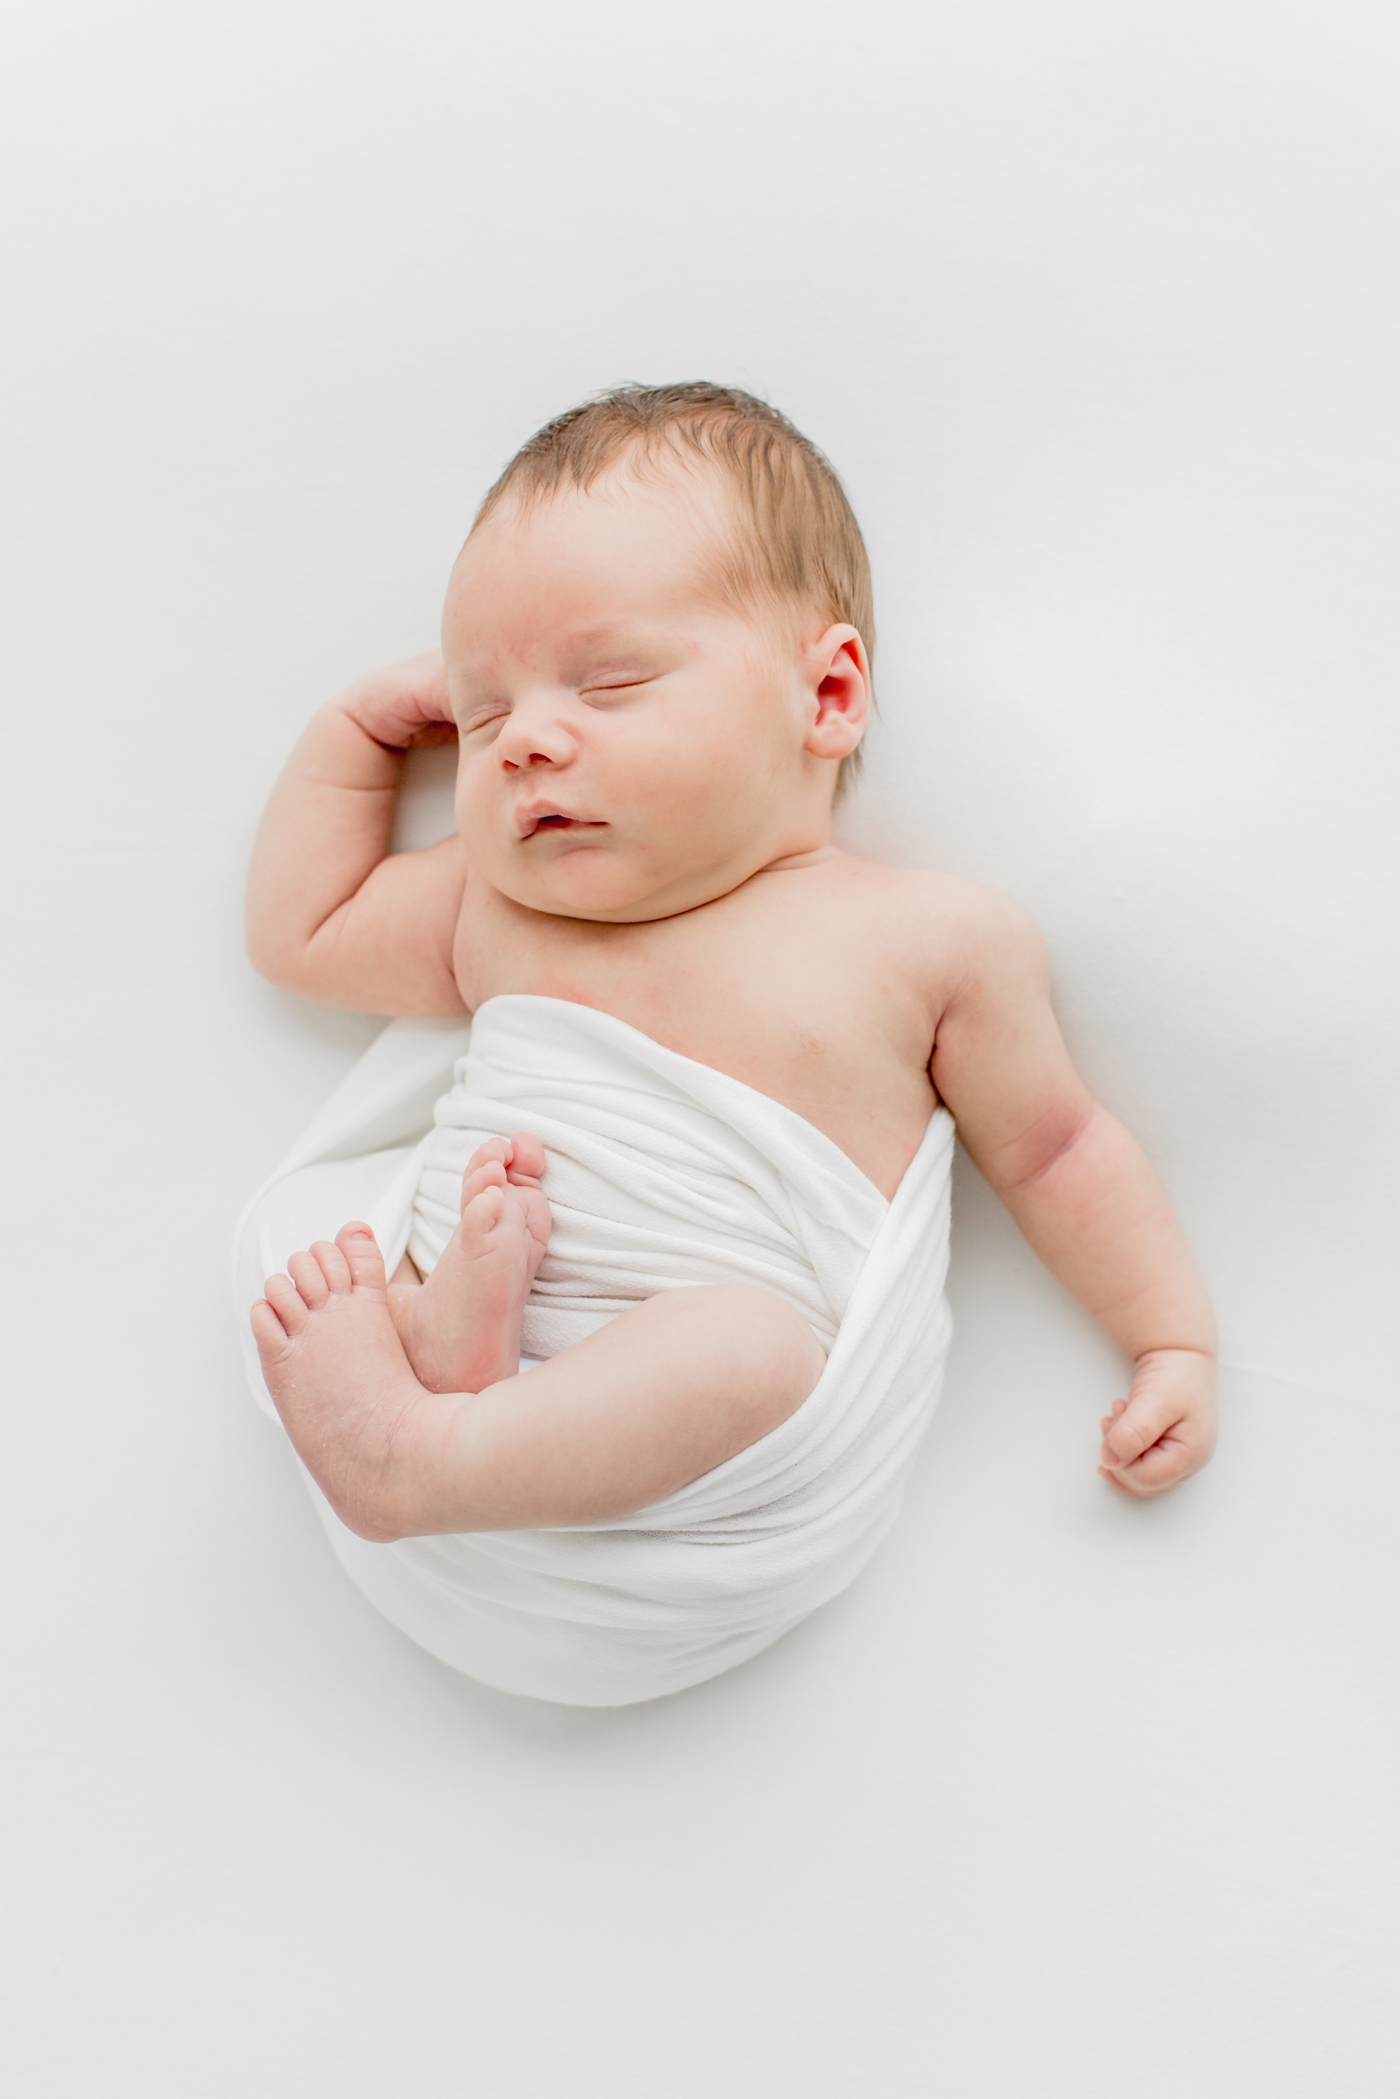 Baby boy sleeping in white swaddle during newborn session in Austin, TX studio. Photo by Sana Ahmed Photography.